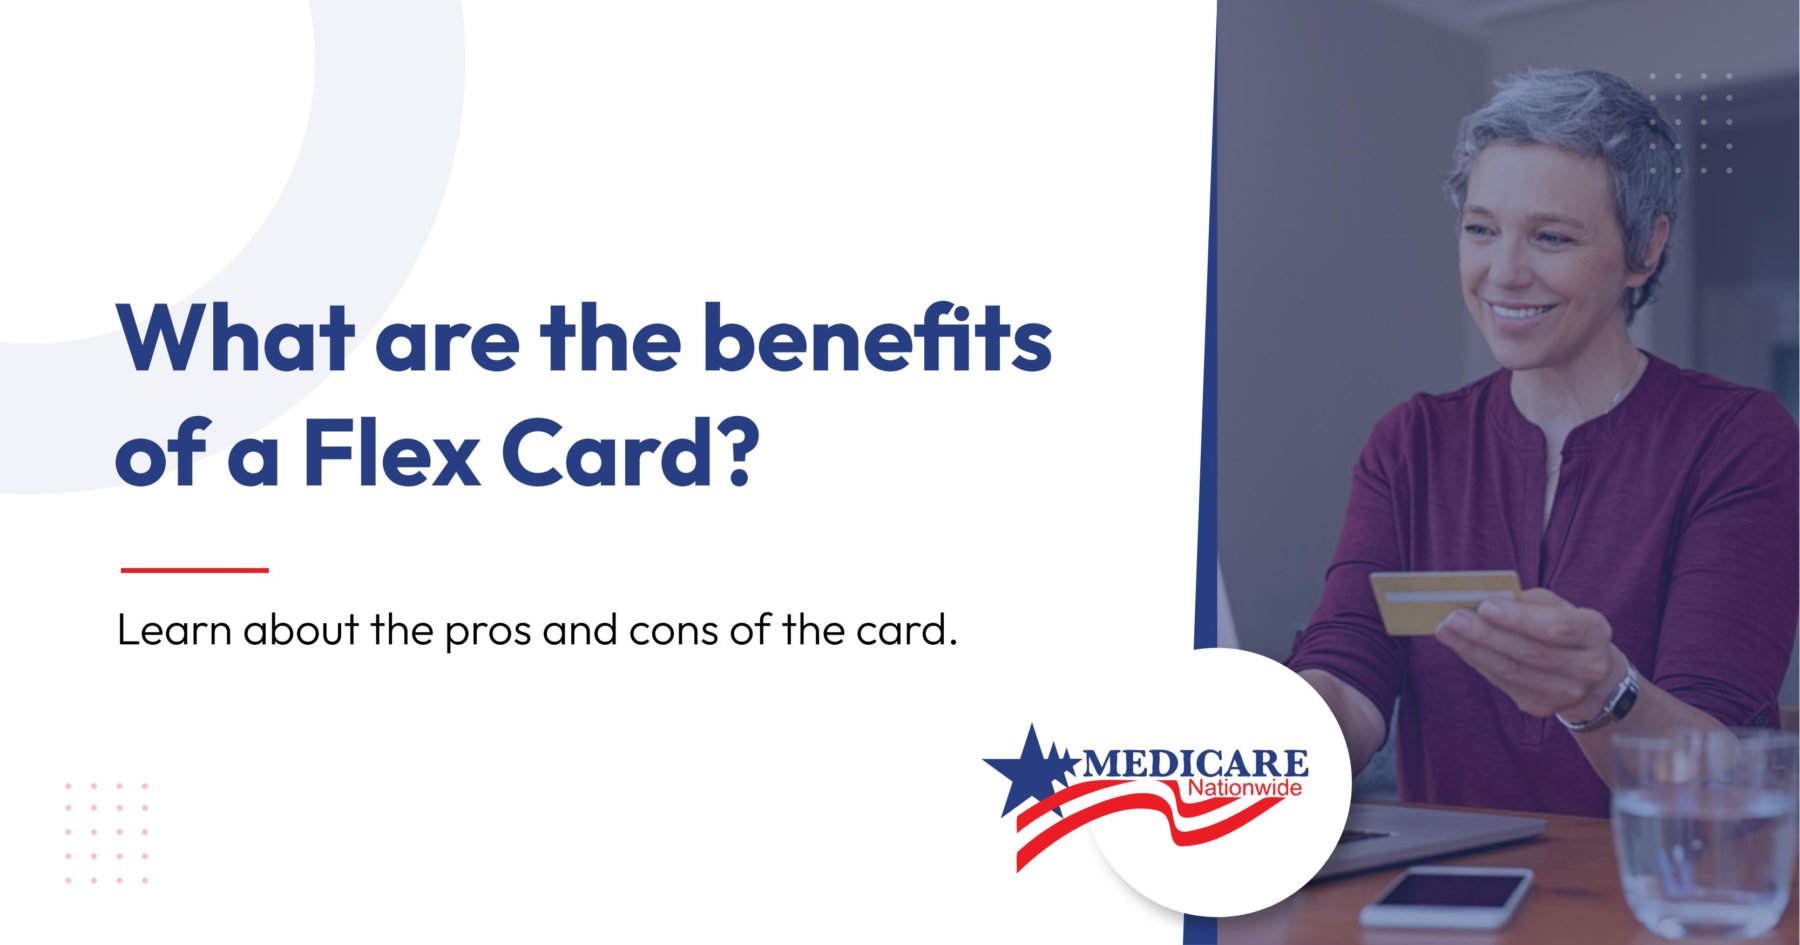 What are the benefits of a Flex Card?